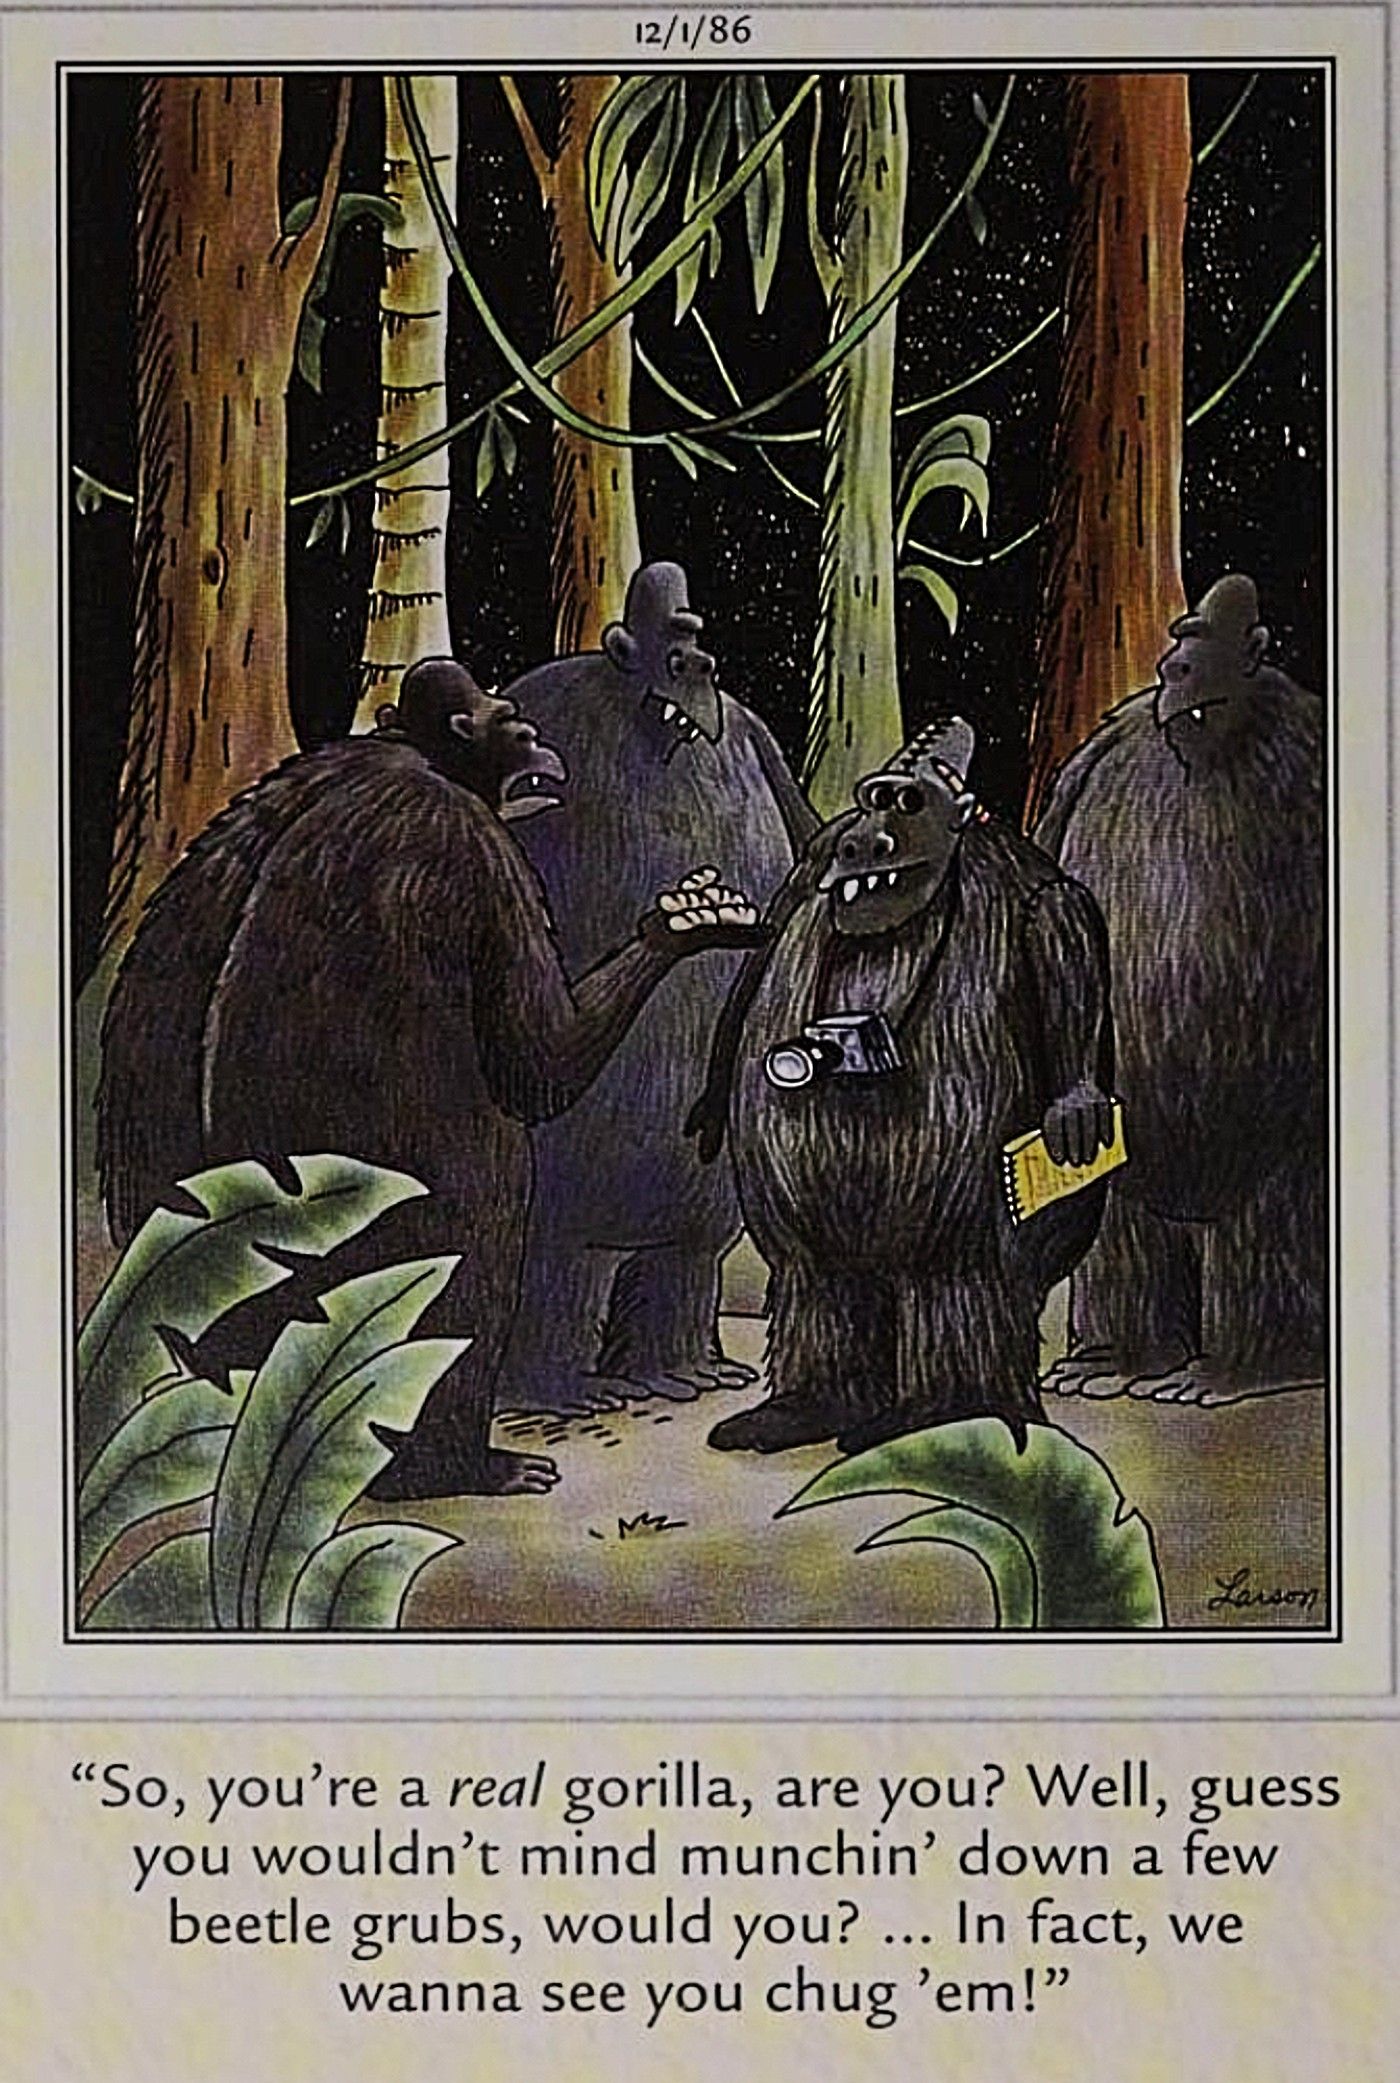 Far Side, fake gorilla is found out by real gorillas